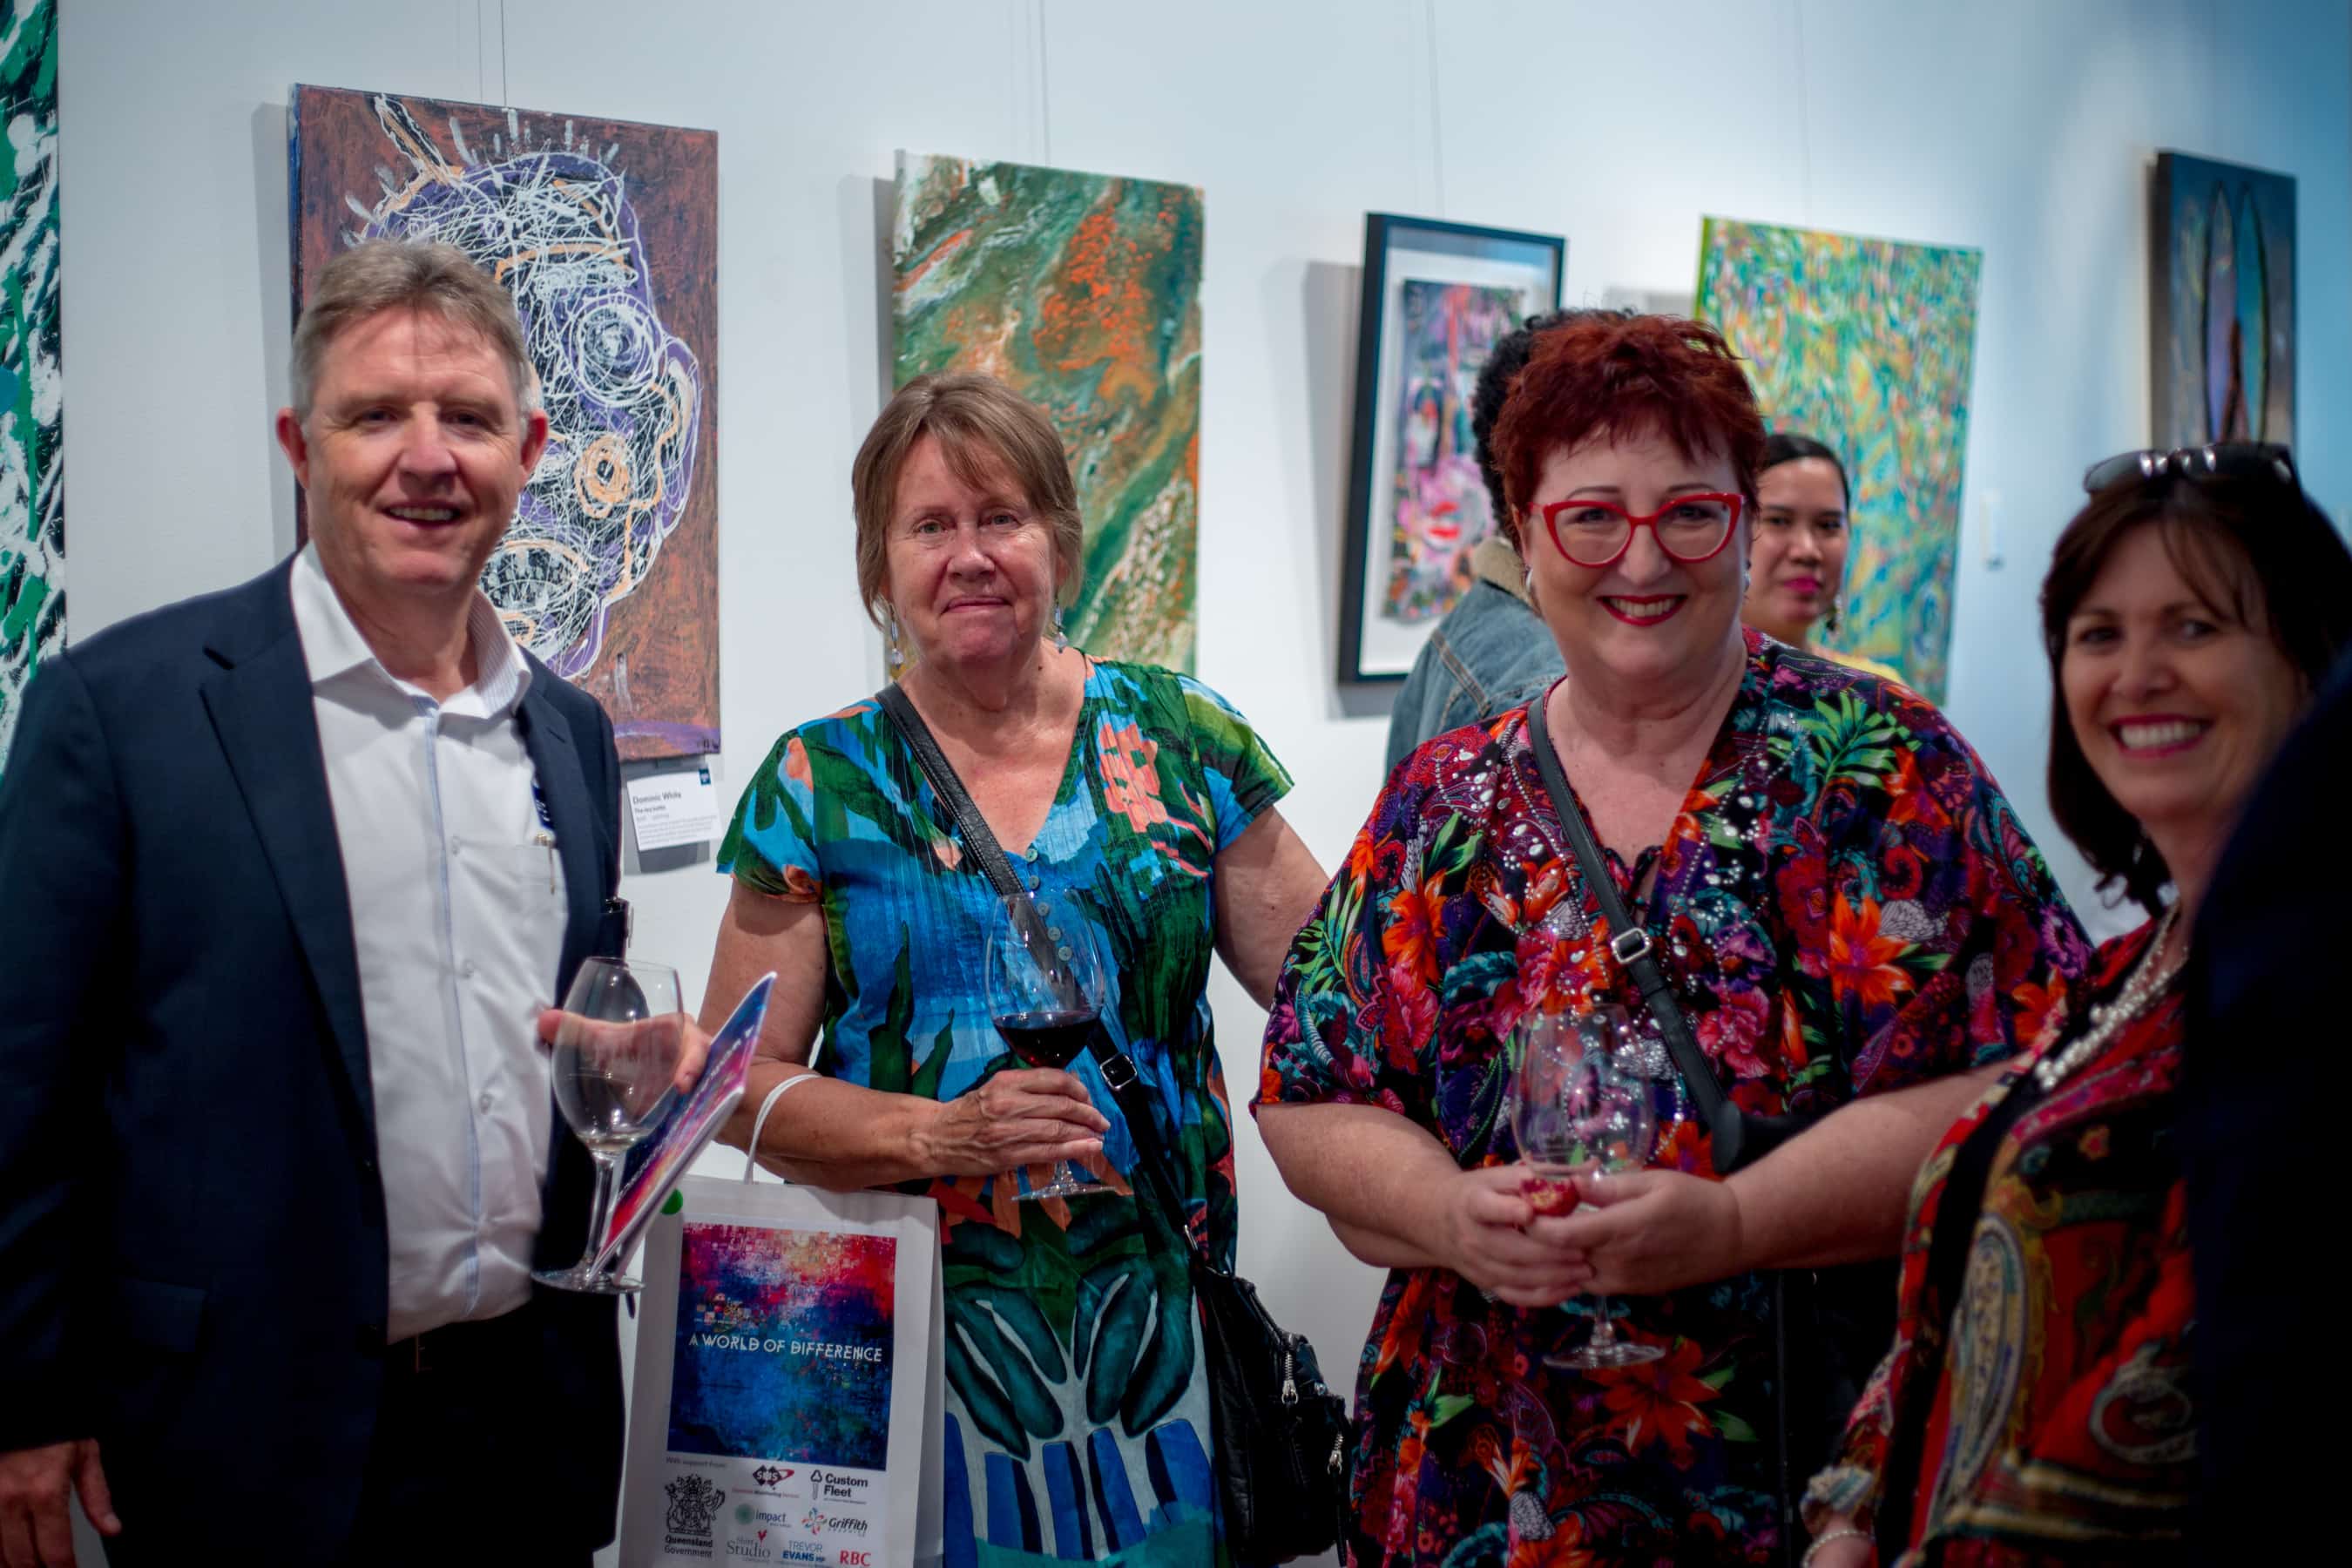 Artists with disability at the 2018 EPIC annual art exhibition